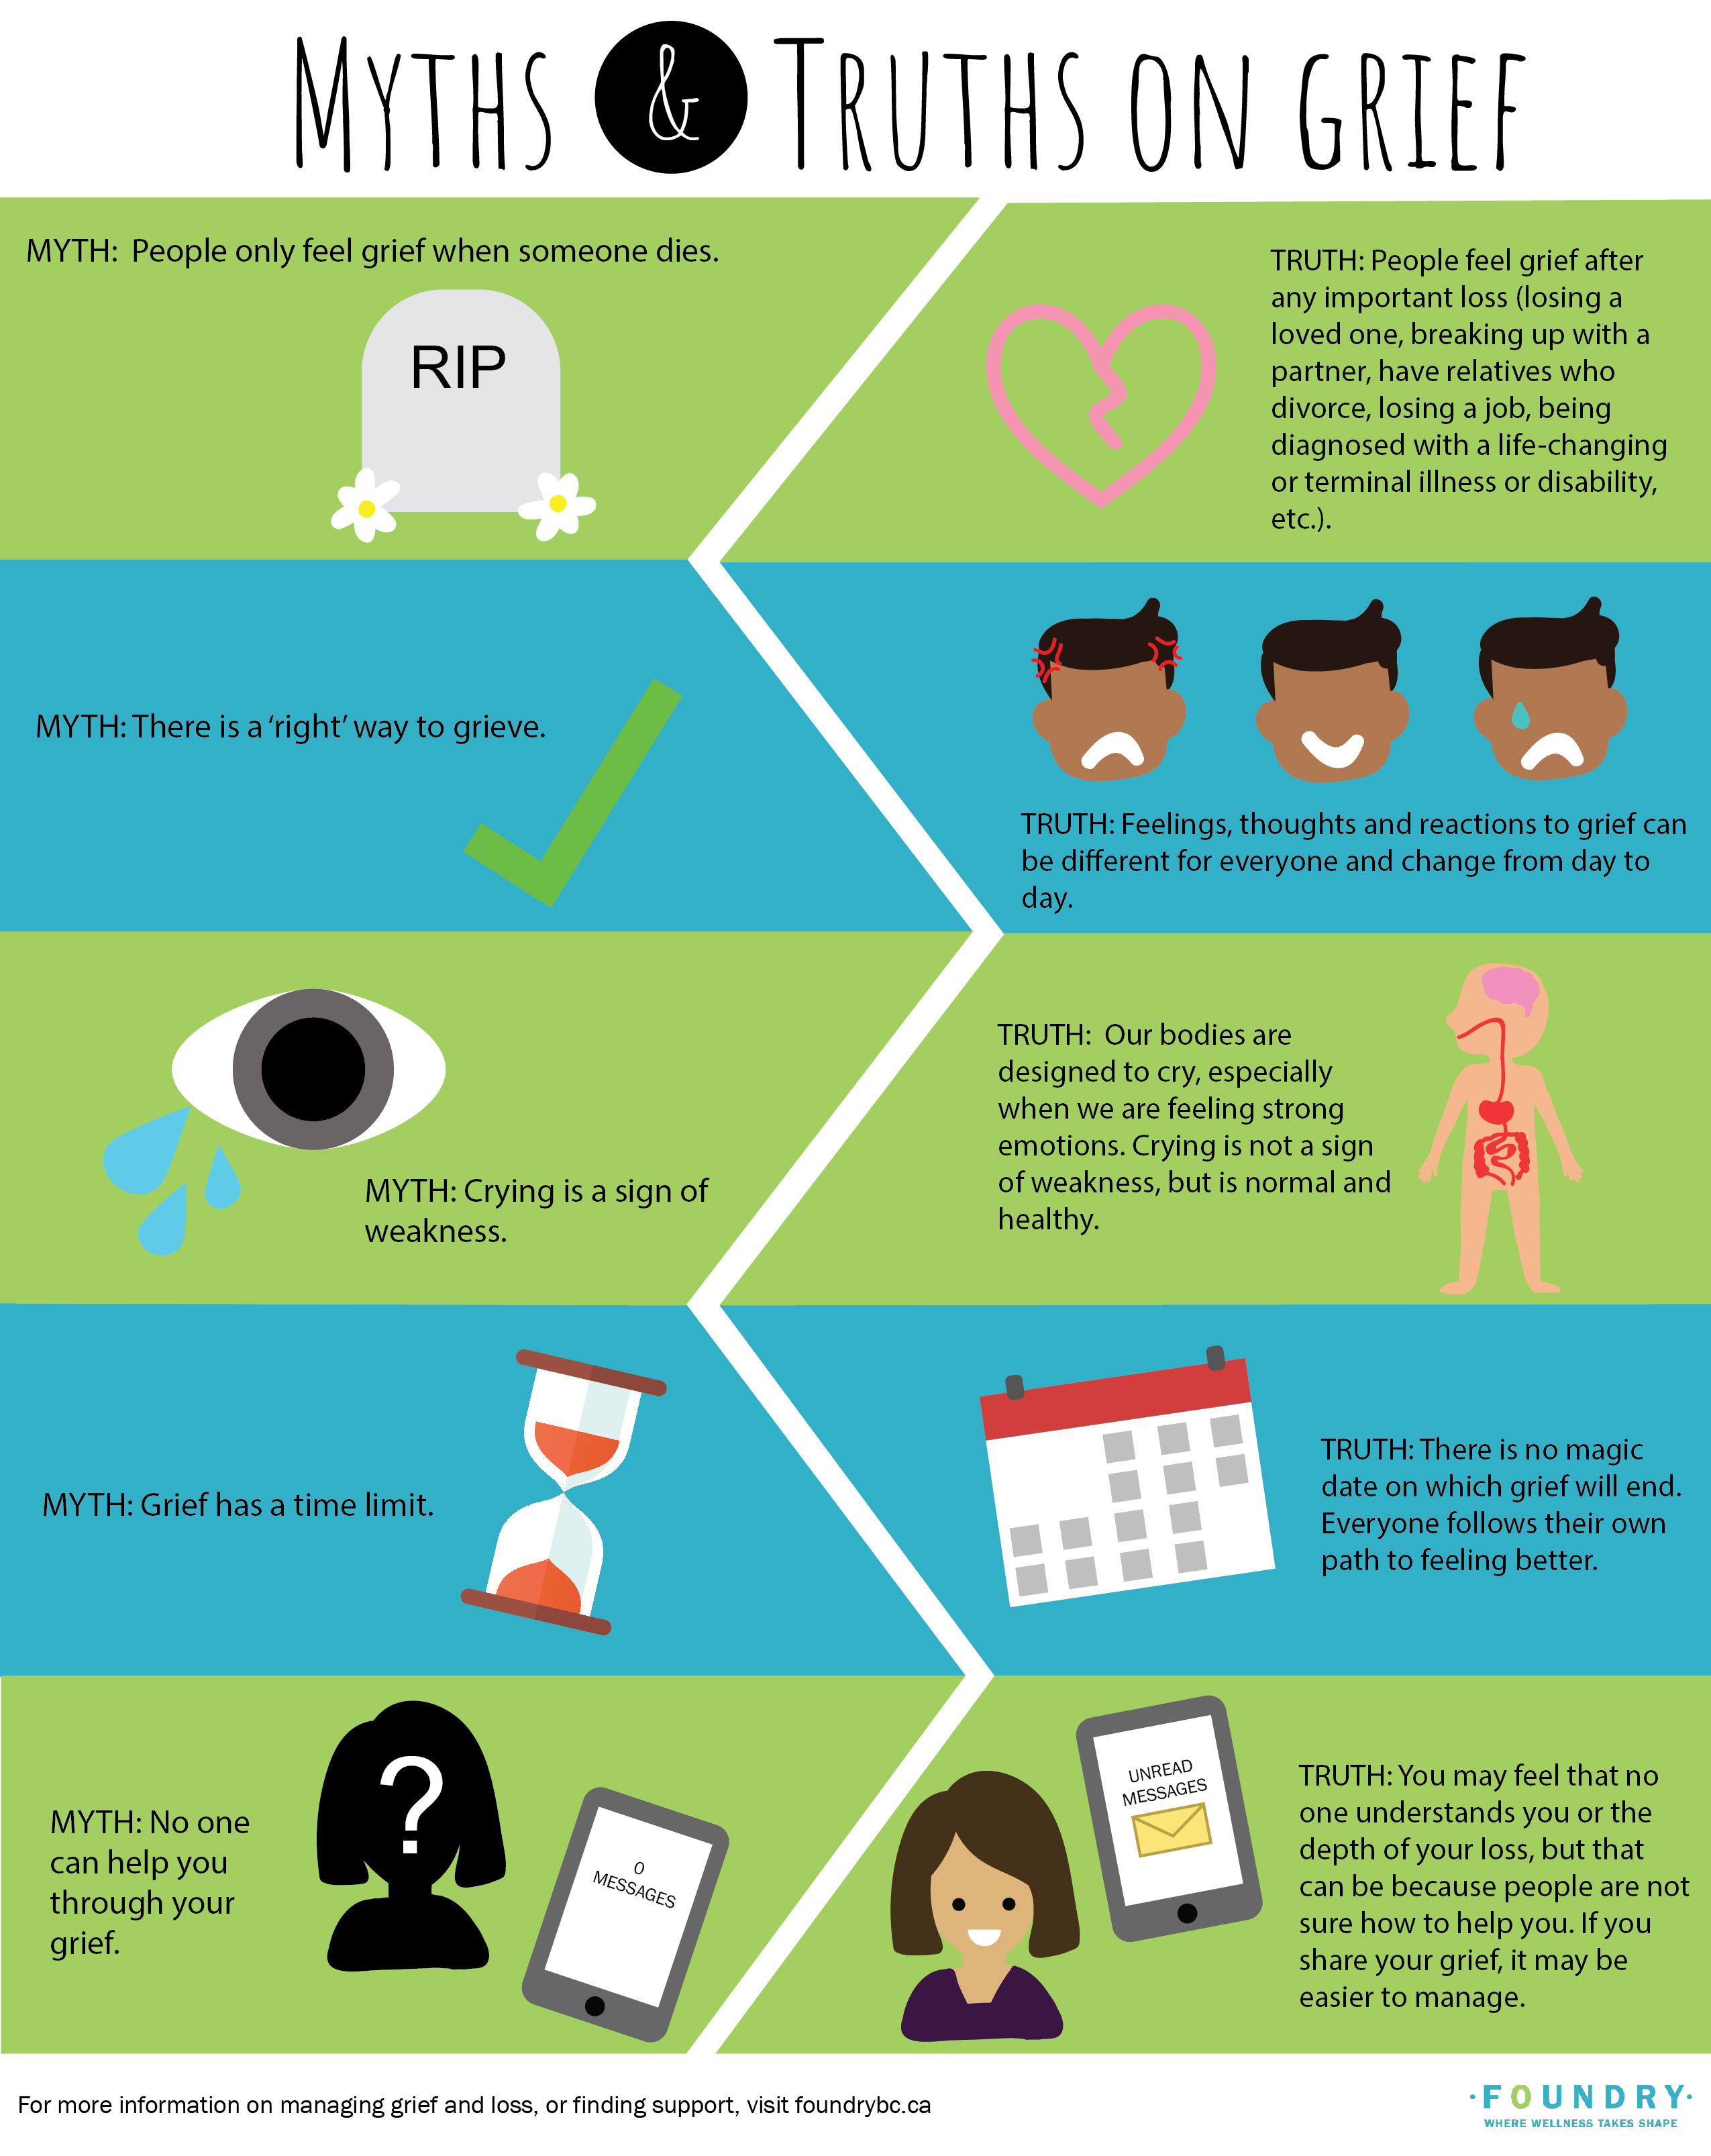 This infographic breaks down myths & truths on grief. 